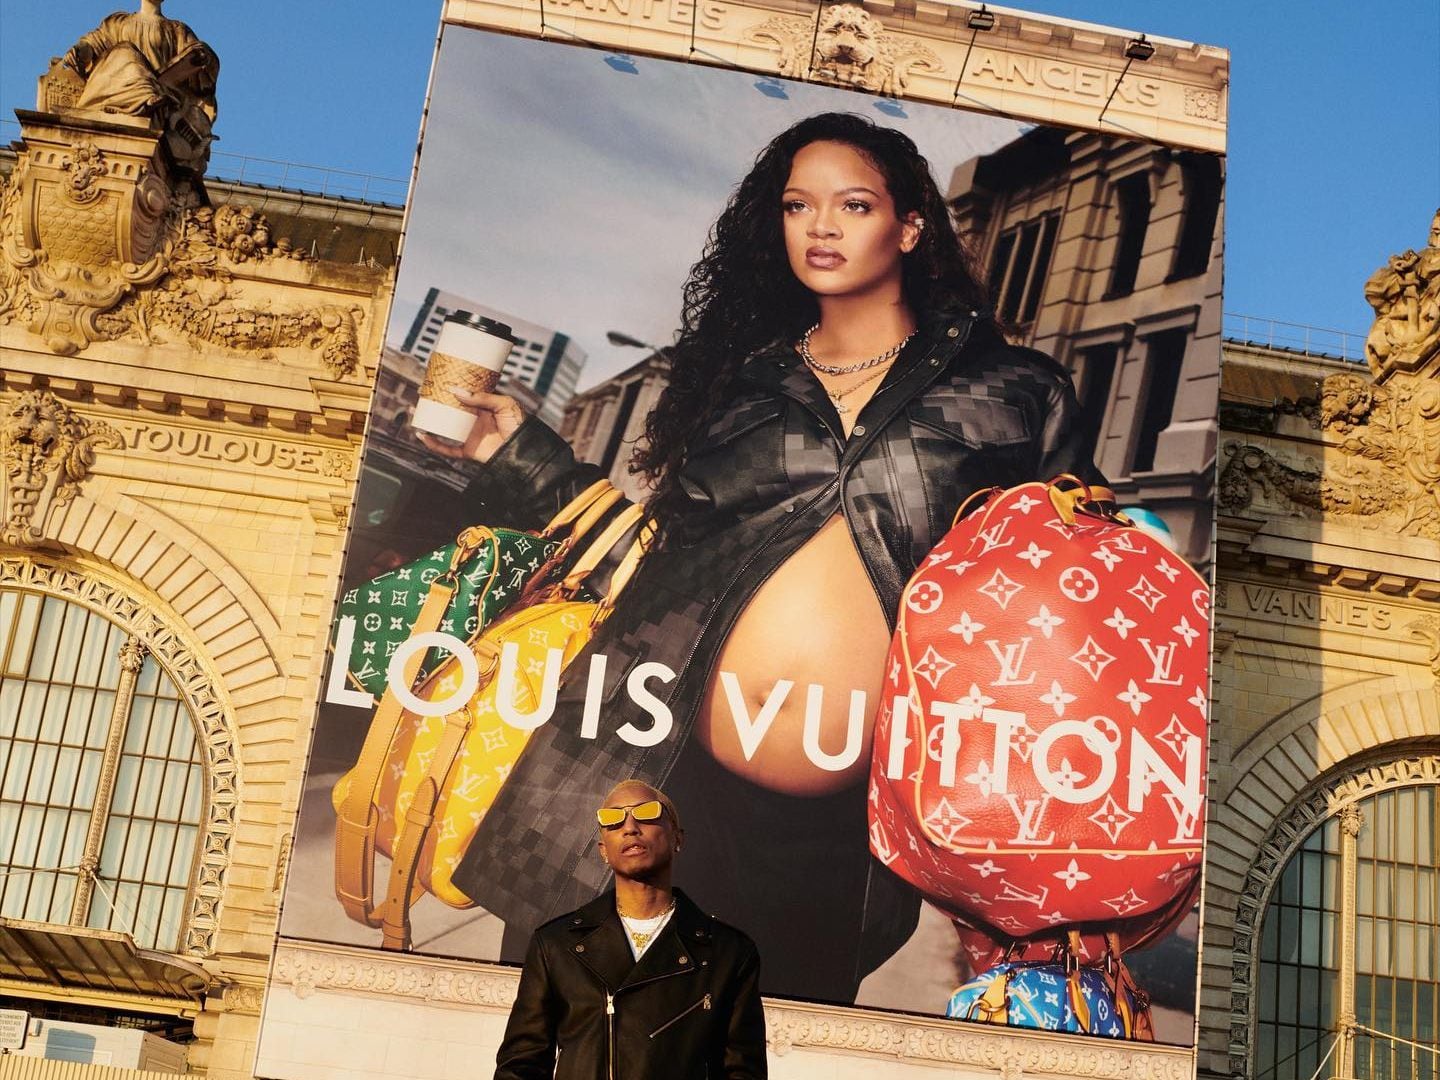 Louis Vuitton and Sotheby's to Auction 22 Artycapucines Bags